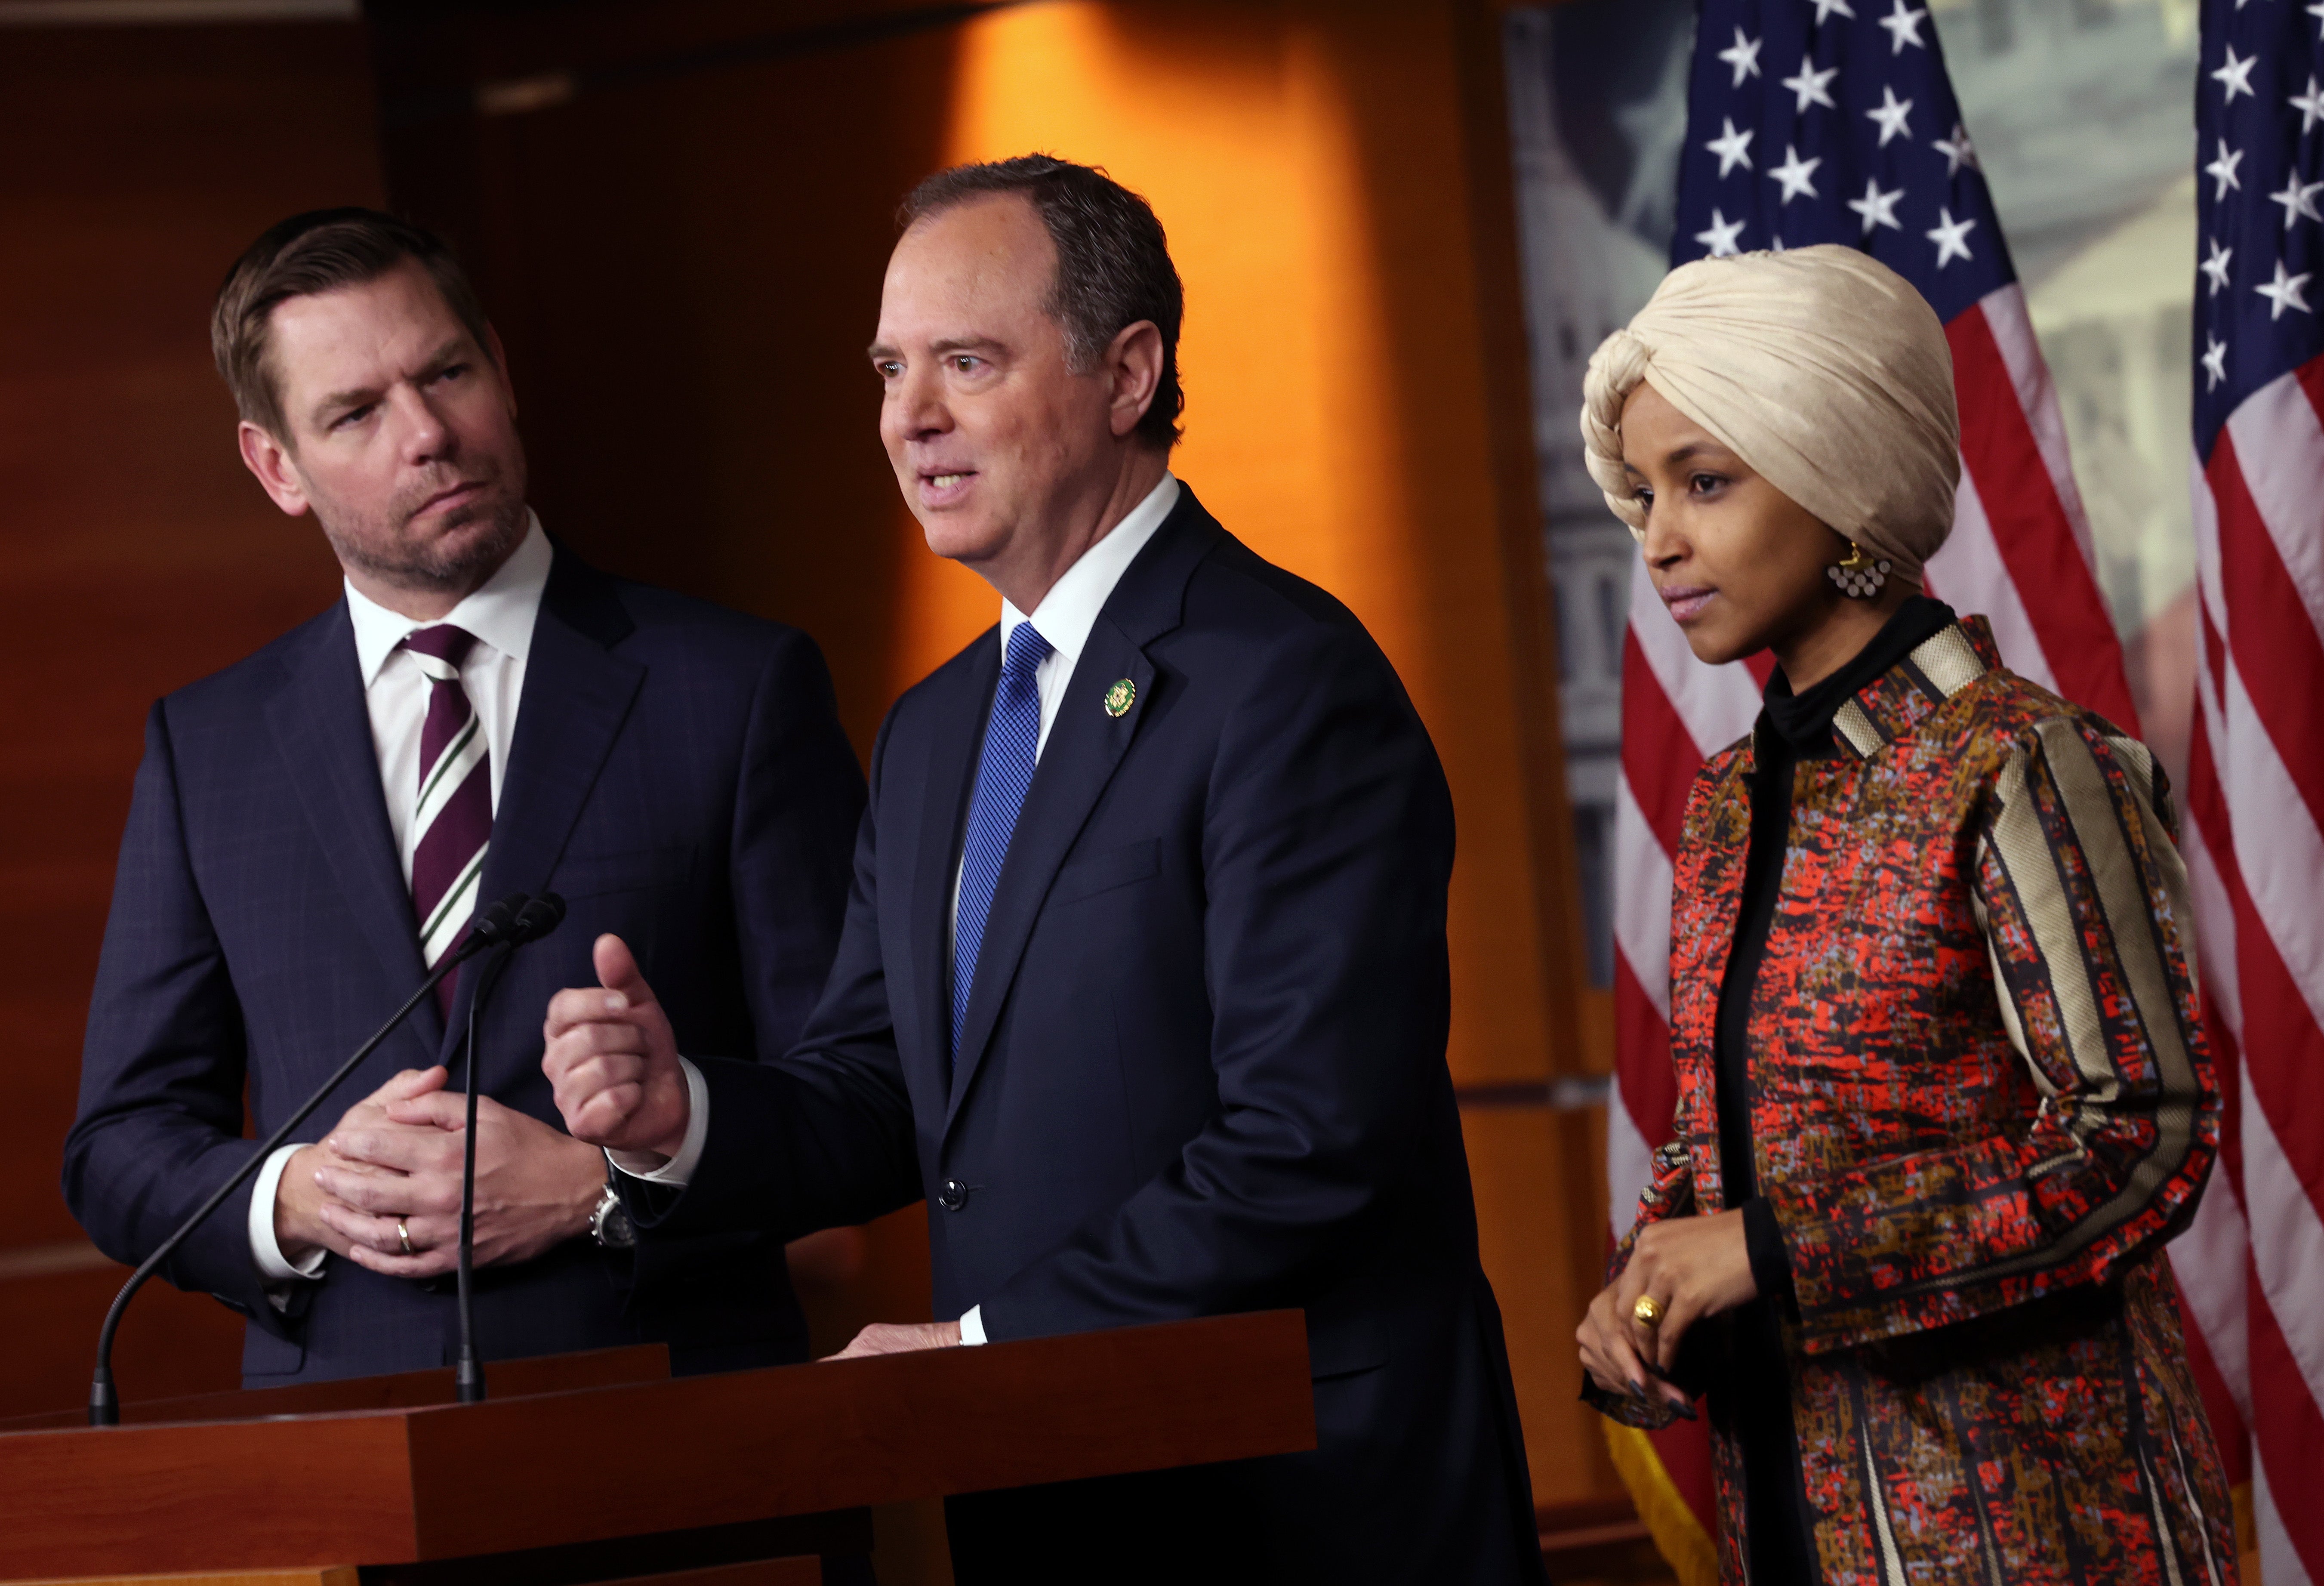 Rep. Adam Schiff (D-CA) (C), joined by Rep. Eric Swalwell (D-CA) and Rep. Ilhan Omar (D-MN), speaks at a press conference on committee assignments for the 118th U.S. Congress, at the U.S. Capitol Building on January 25, 2023 in Washington, DC. House Speaker Kevin McCarthy (R-CA) recently rejected the reappointments of Rep. Adam Schiff (D-CA) and Rep. Eric Swalwell (D-CA) to the House Intelligence Committee and has threatened to stop Rep. Ilhan Omar (D-MN) from serving on the House Foreign Affairs Committee. (Photo by Kevin Dietsch/Getty Images)